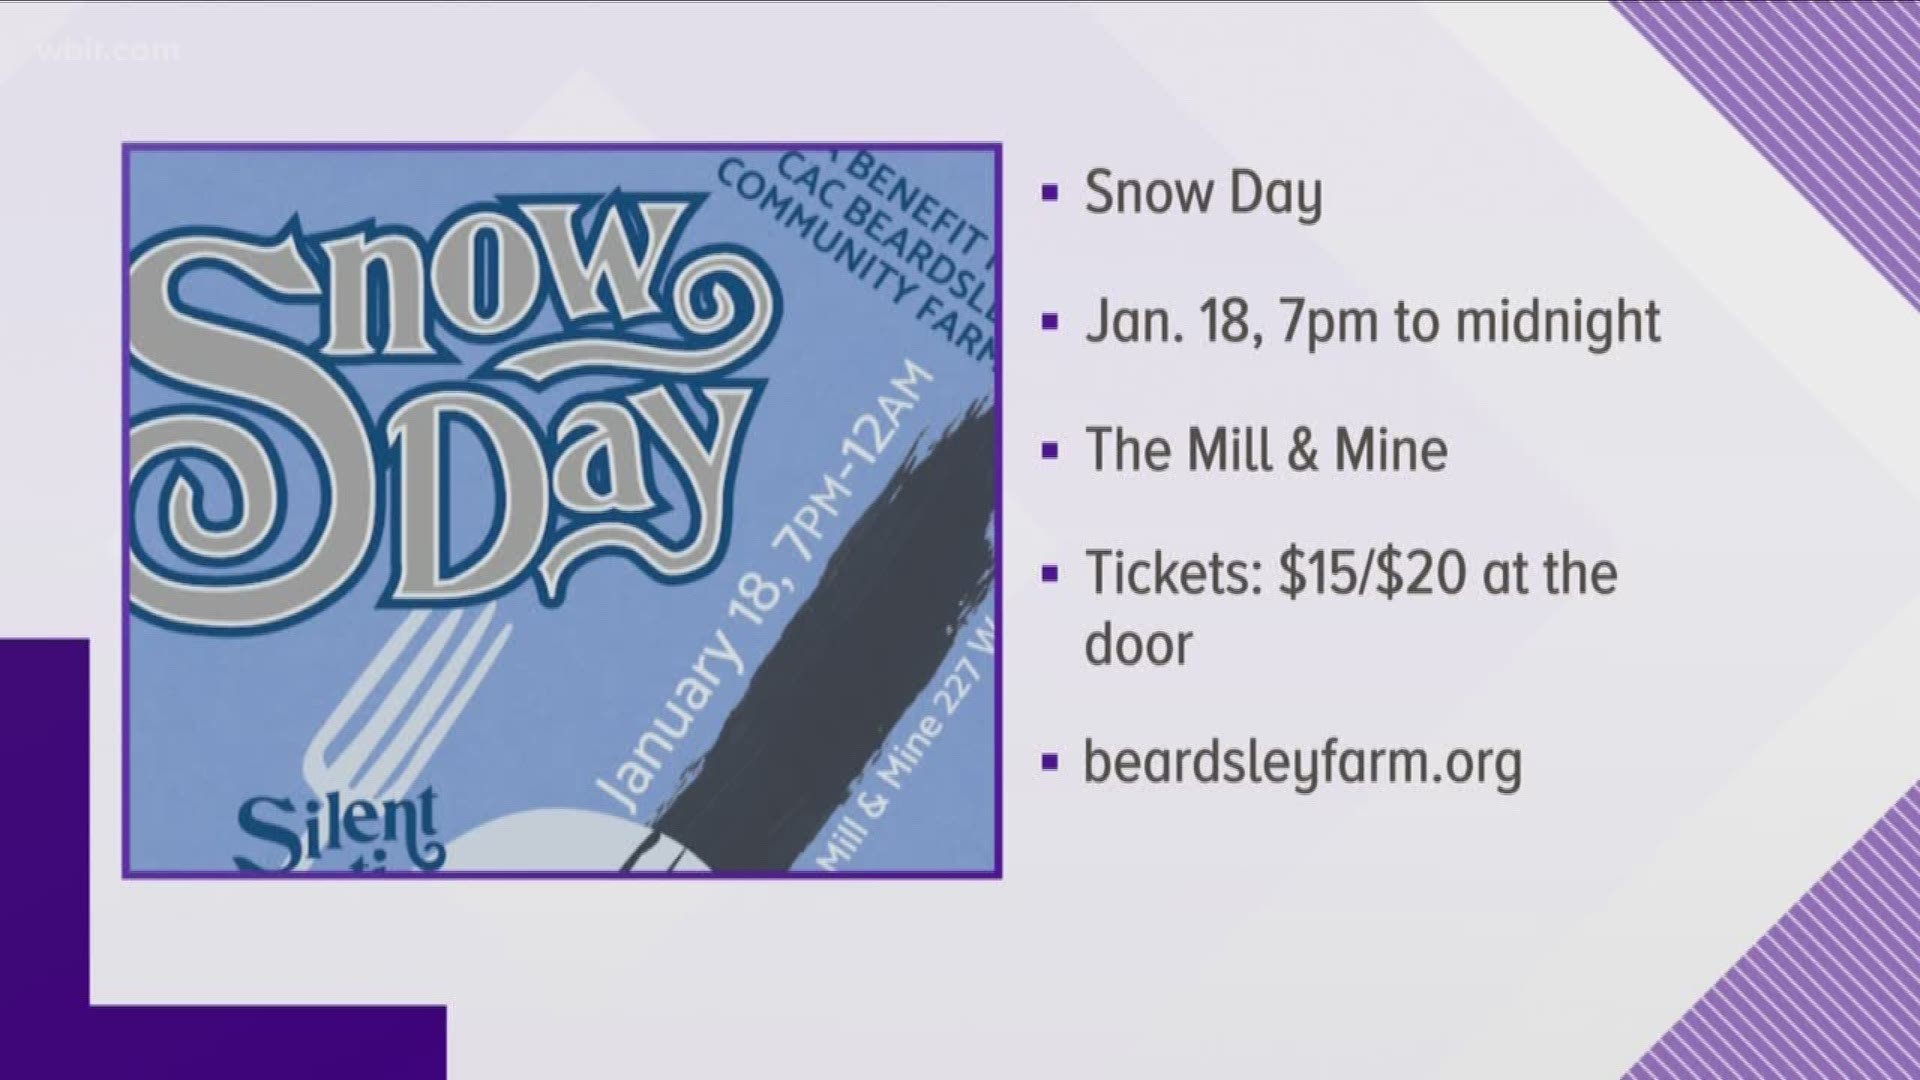 "Snow Day" soup dinner to benefit CAC Beardsley Farm is Jan. 18, from 7pm to midnight, at The Mill & Mine. Event includes locally made soups and music. $15 to pre-order/$20 at the door. To learn more visit beardsleyfarm.org. Jan 14, 2019-4pm